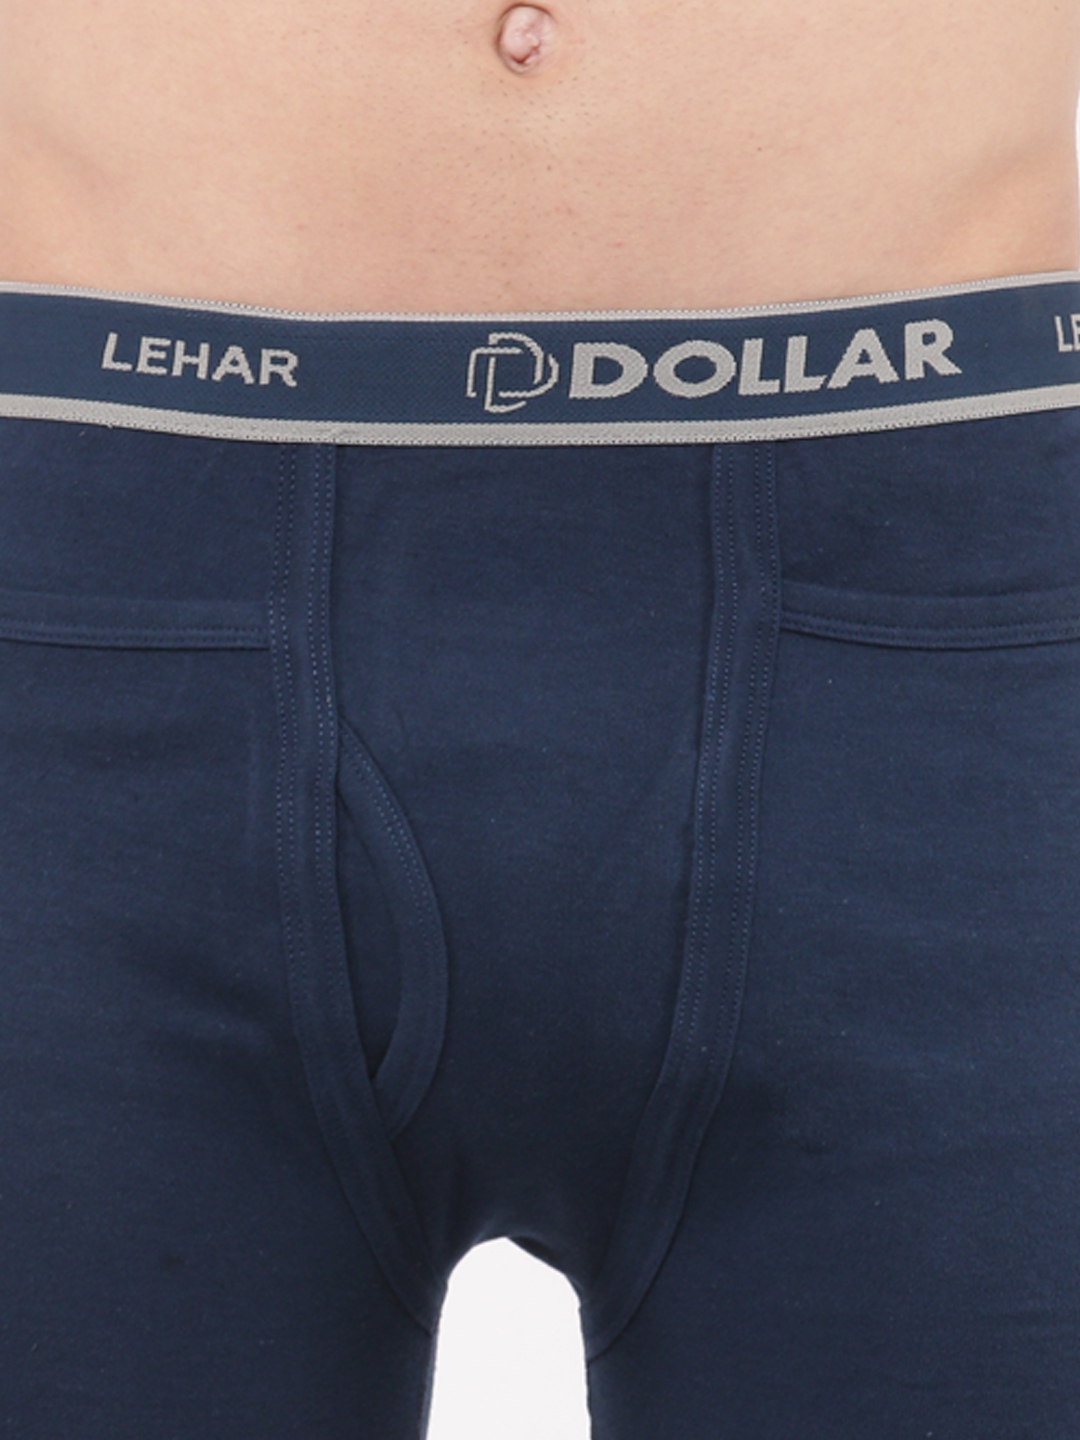 Buy DOLLAR Lehar Men's Assorted Solid 100% Cotton Pack of 3 Trunks Online  at Best Prices in India - JioMart.